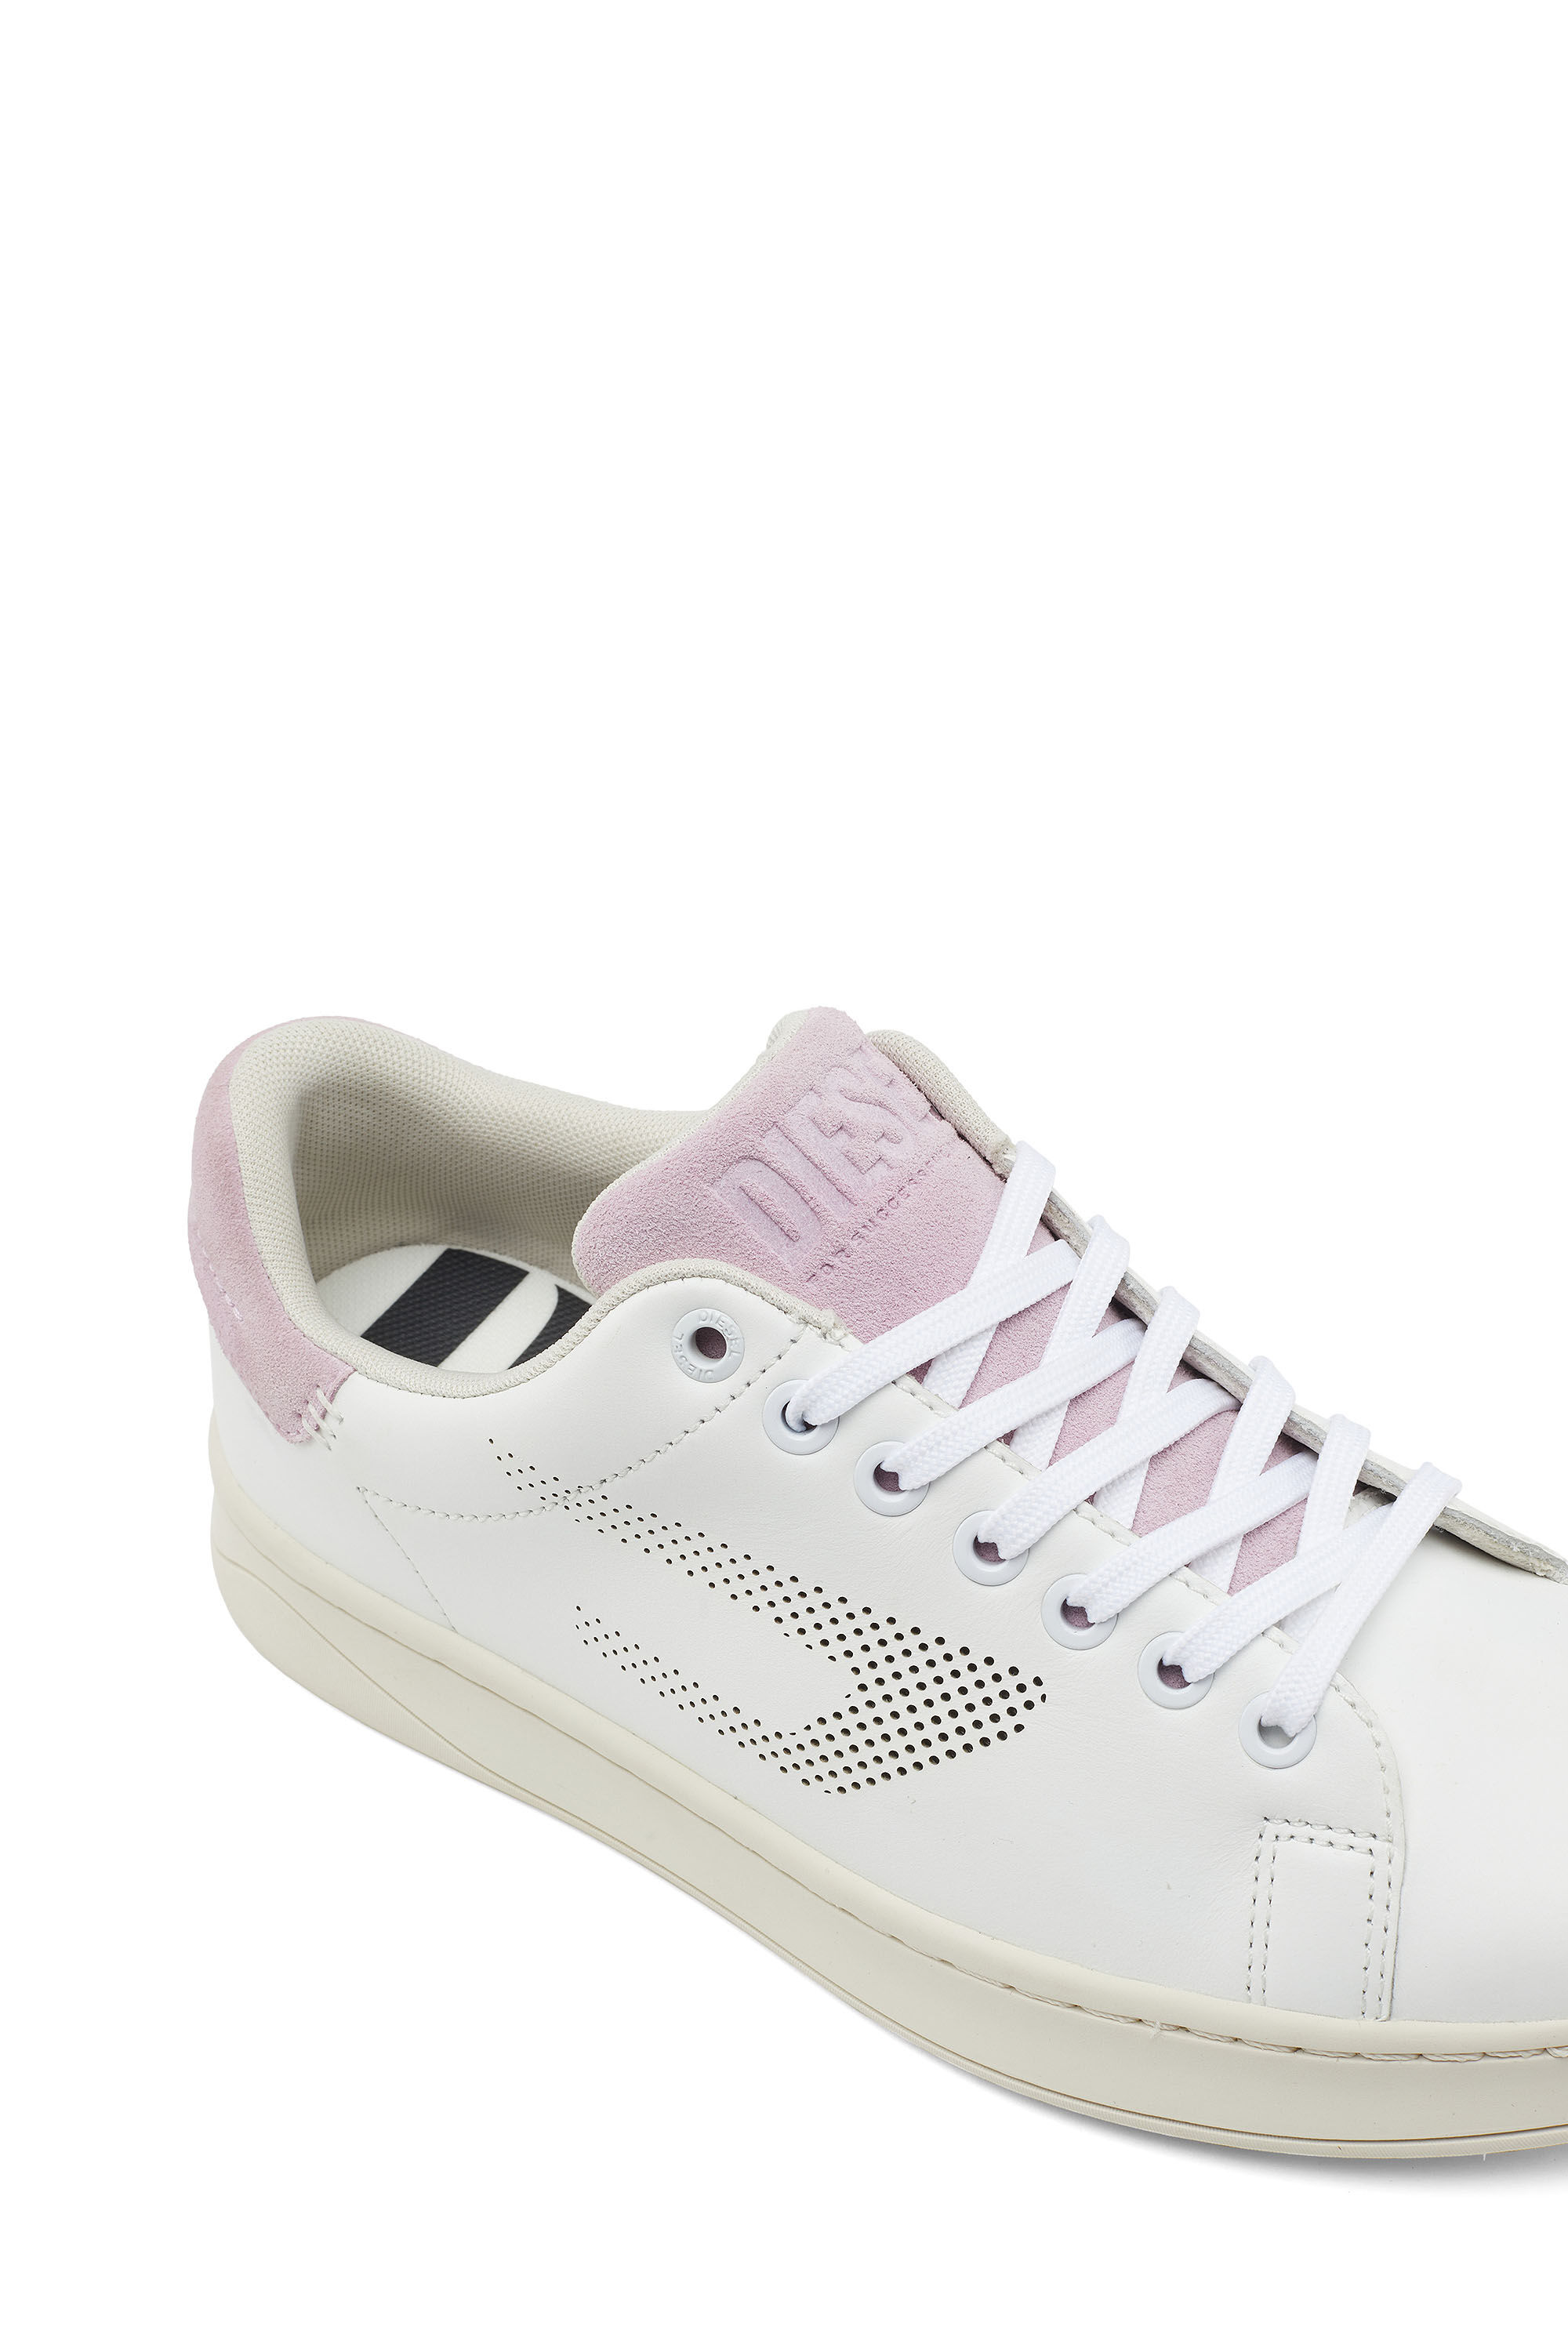 Diesel - S-ATHENE LOW W, Rosa/Weiss - Image 6